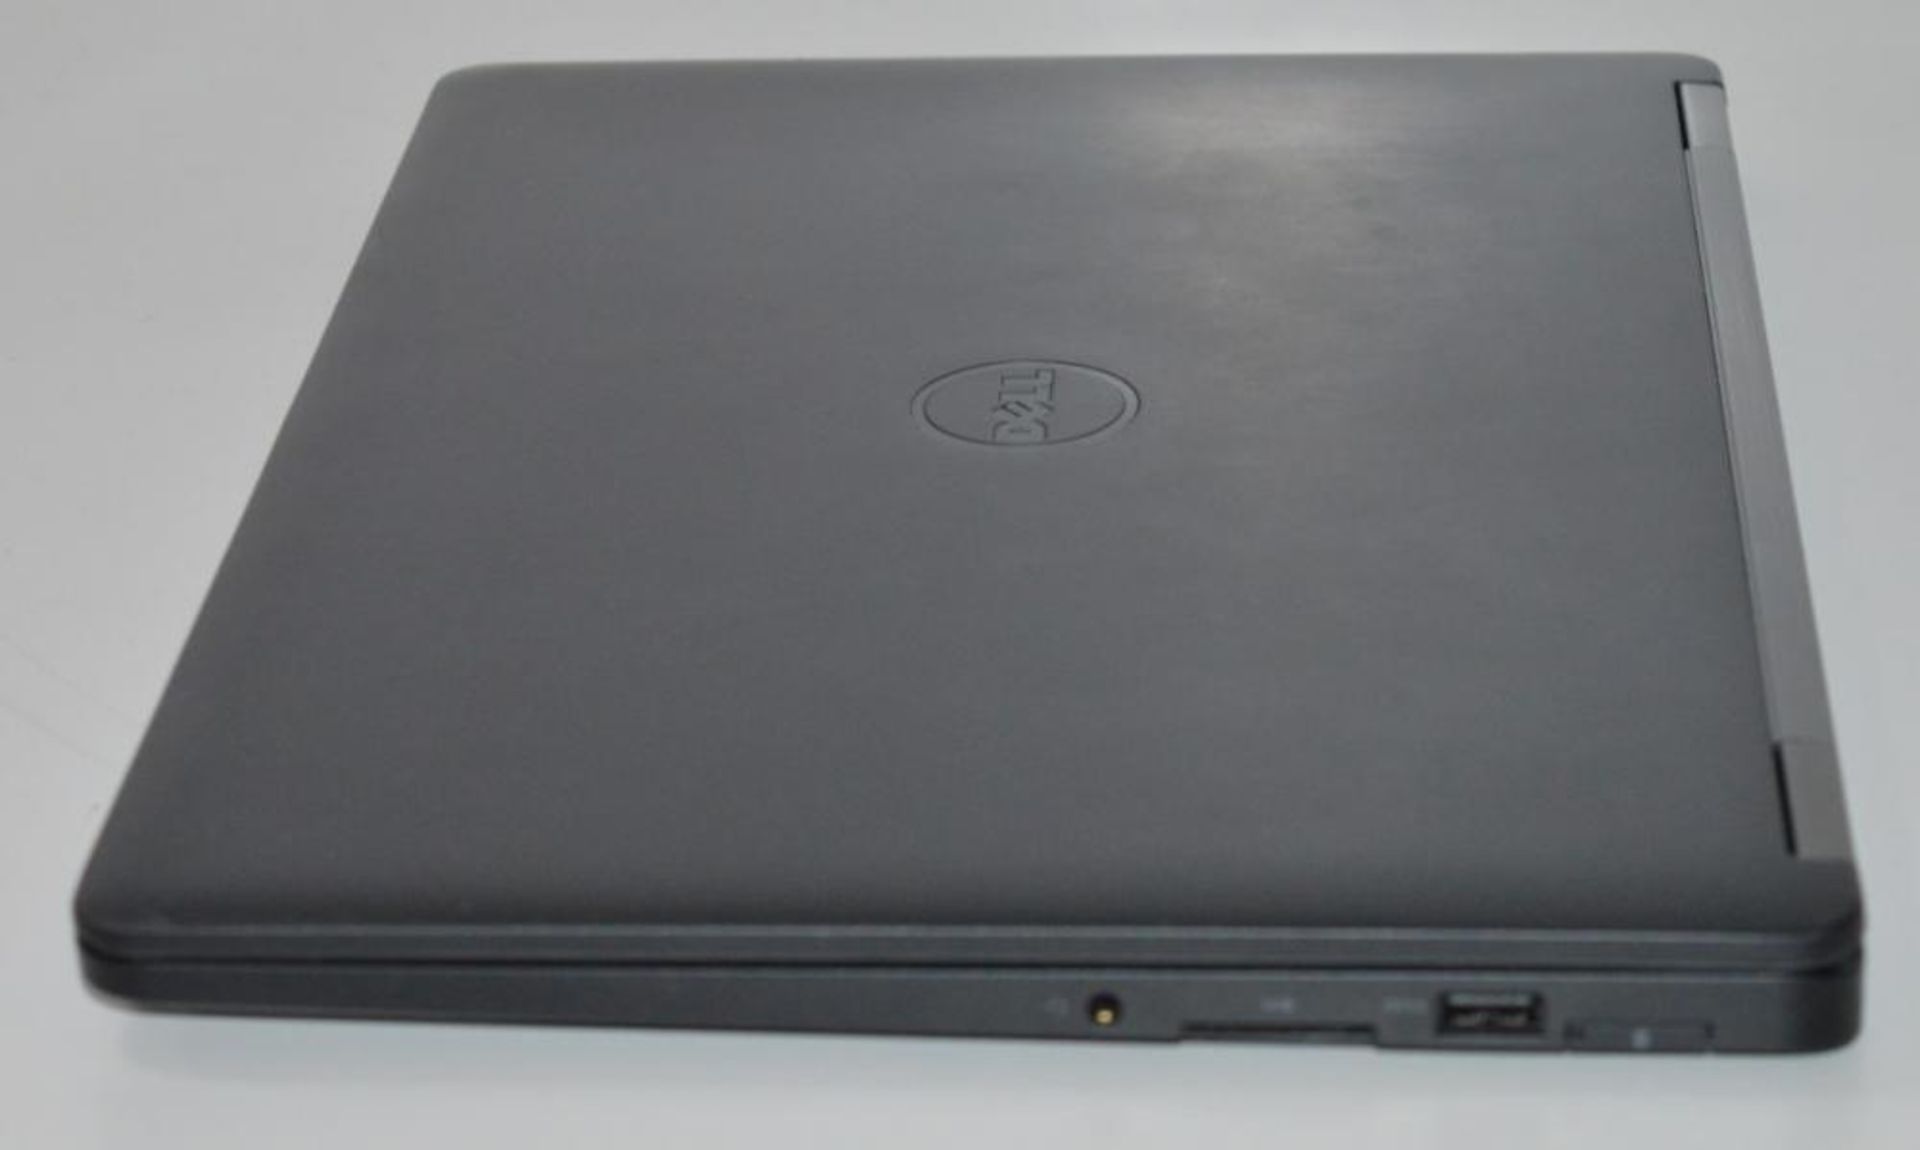 1 x Dell Latitude E7470 Laptop Computer - 14 Inch FHD Screen - Features Include a 6th Gen Core i7- - Image 7 of 10